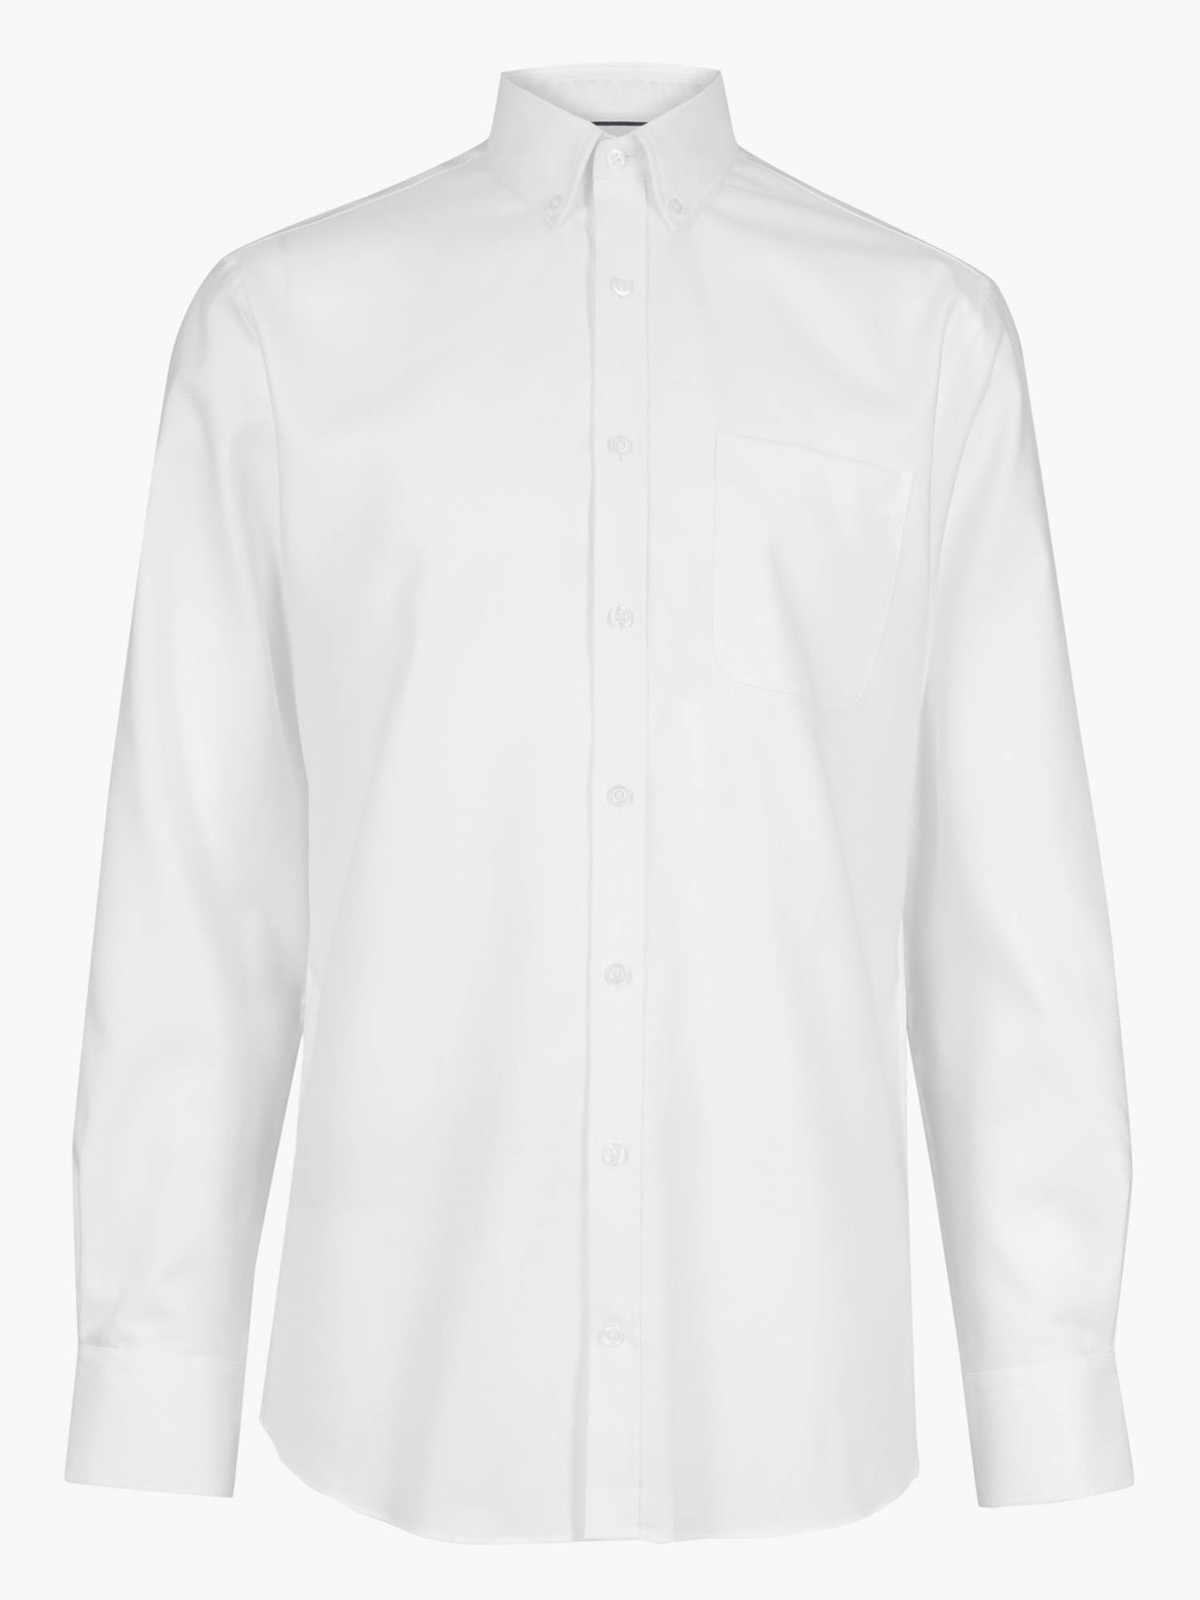 Marks and Spencer - - M&5 WHITE Pure Cotton Long Sleeve Shirt - Collar ...